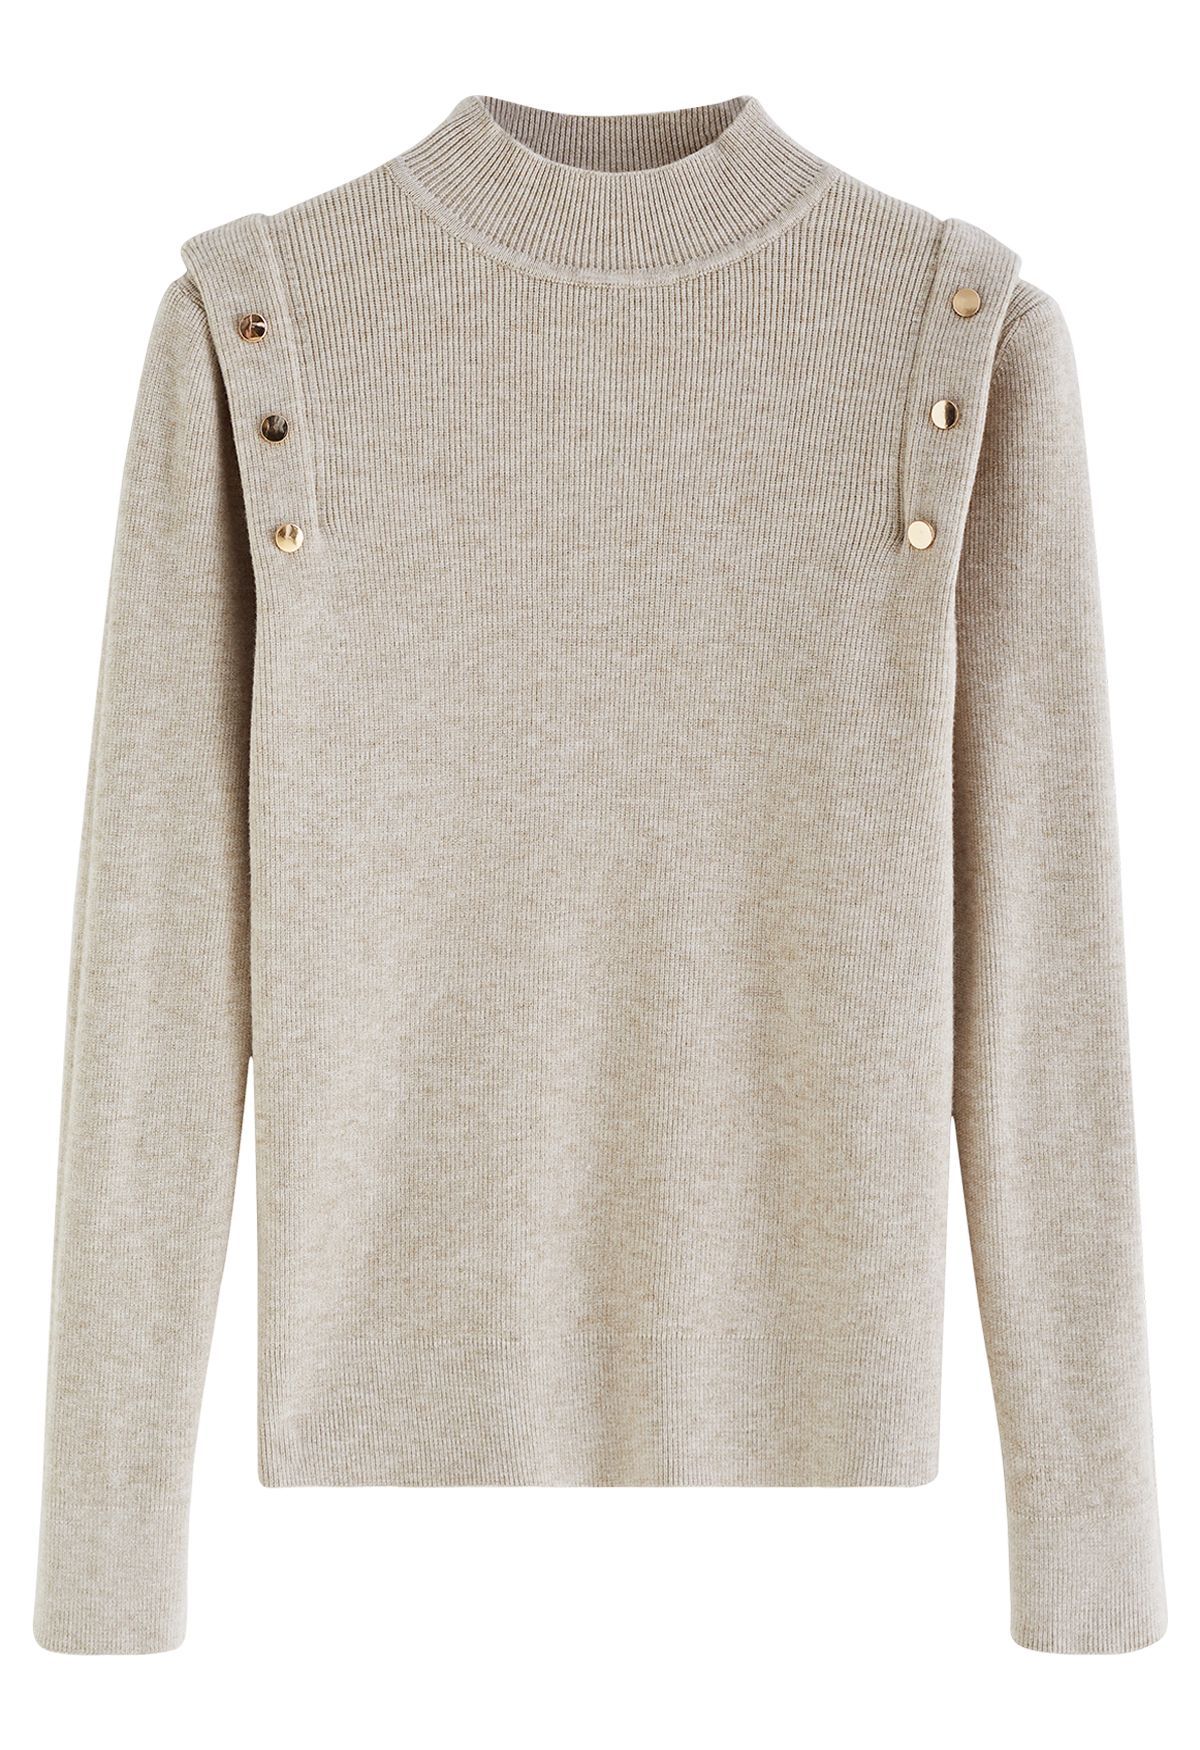 Buttons Embellished Mock Neck Knit Top in Oatmeal | Chicwish